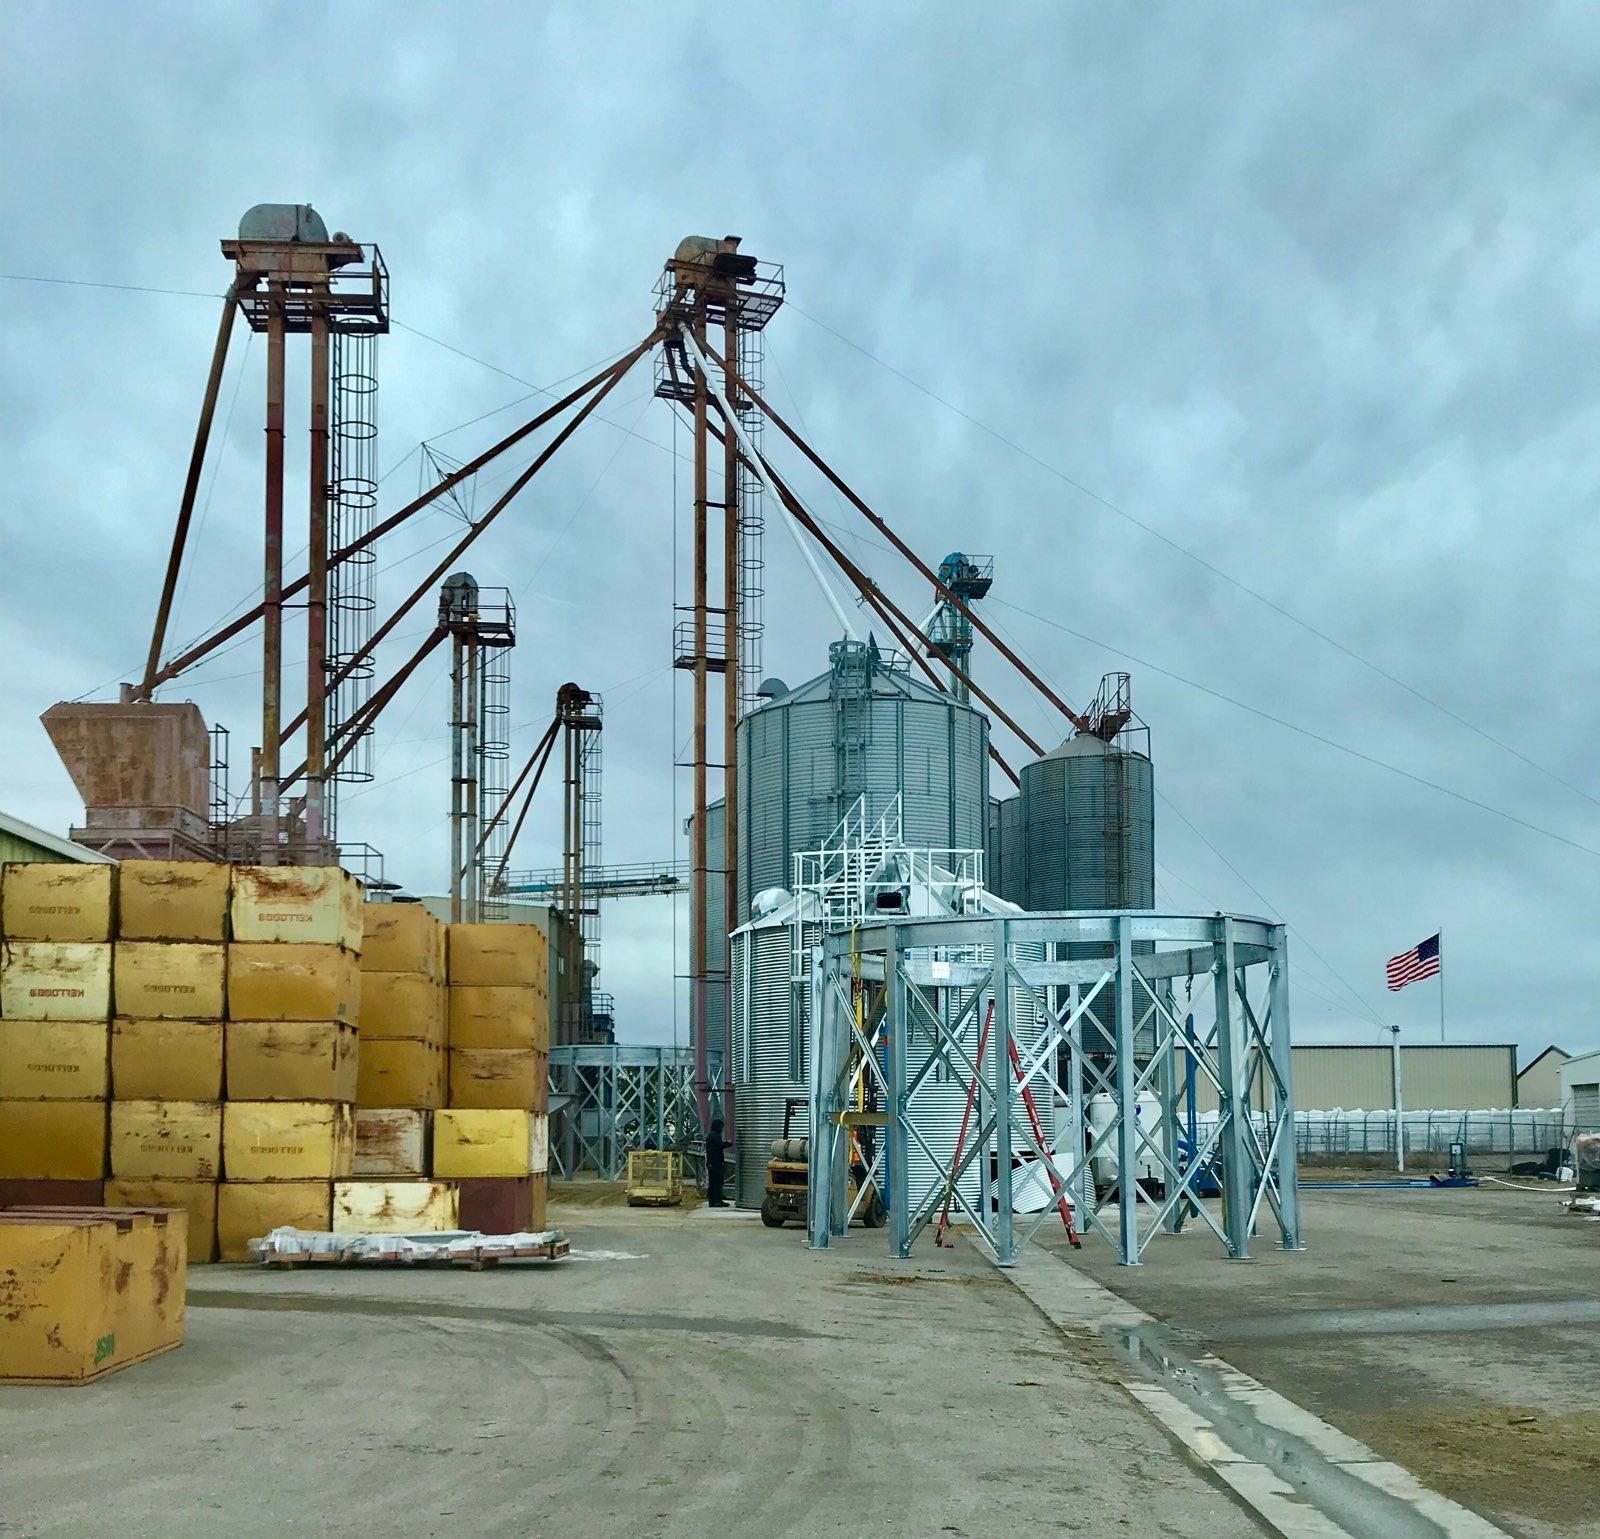 Wheat Cleaning Equipment and Facility Addition